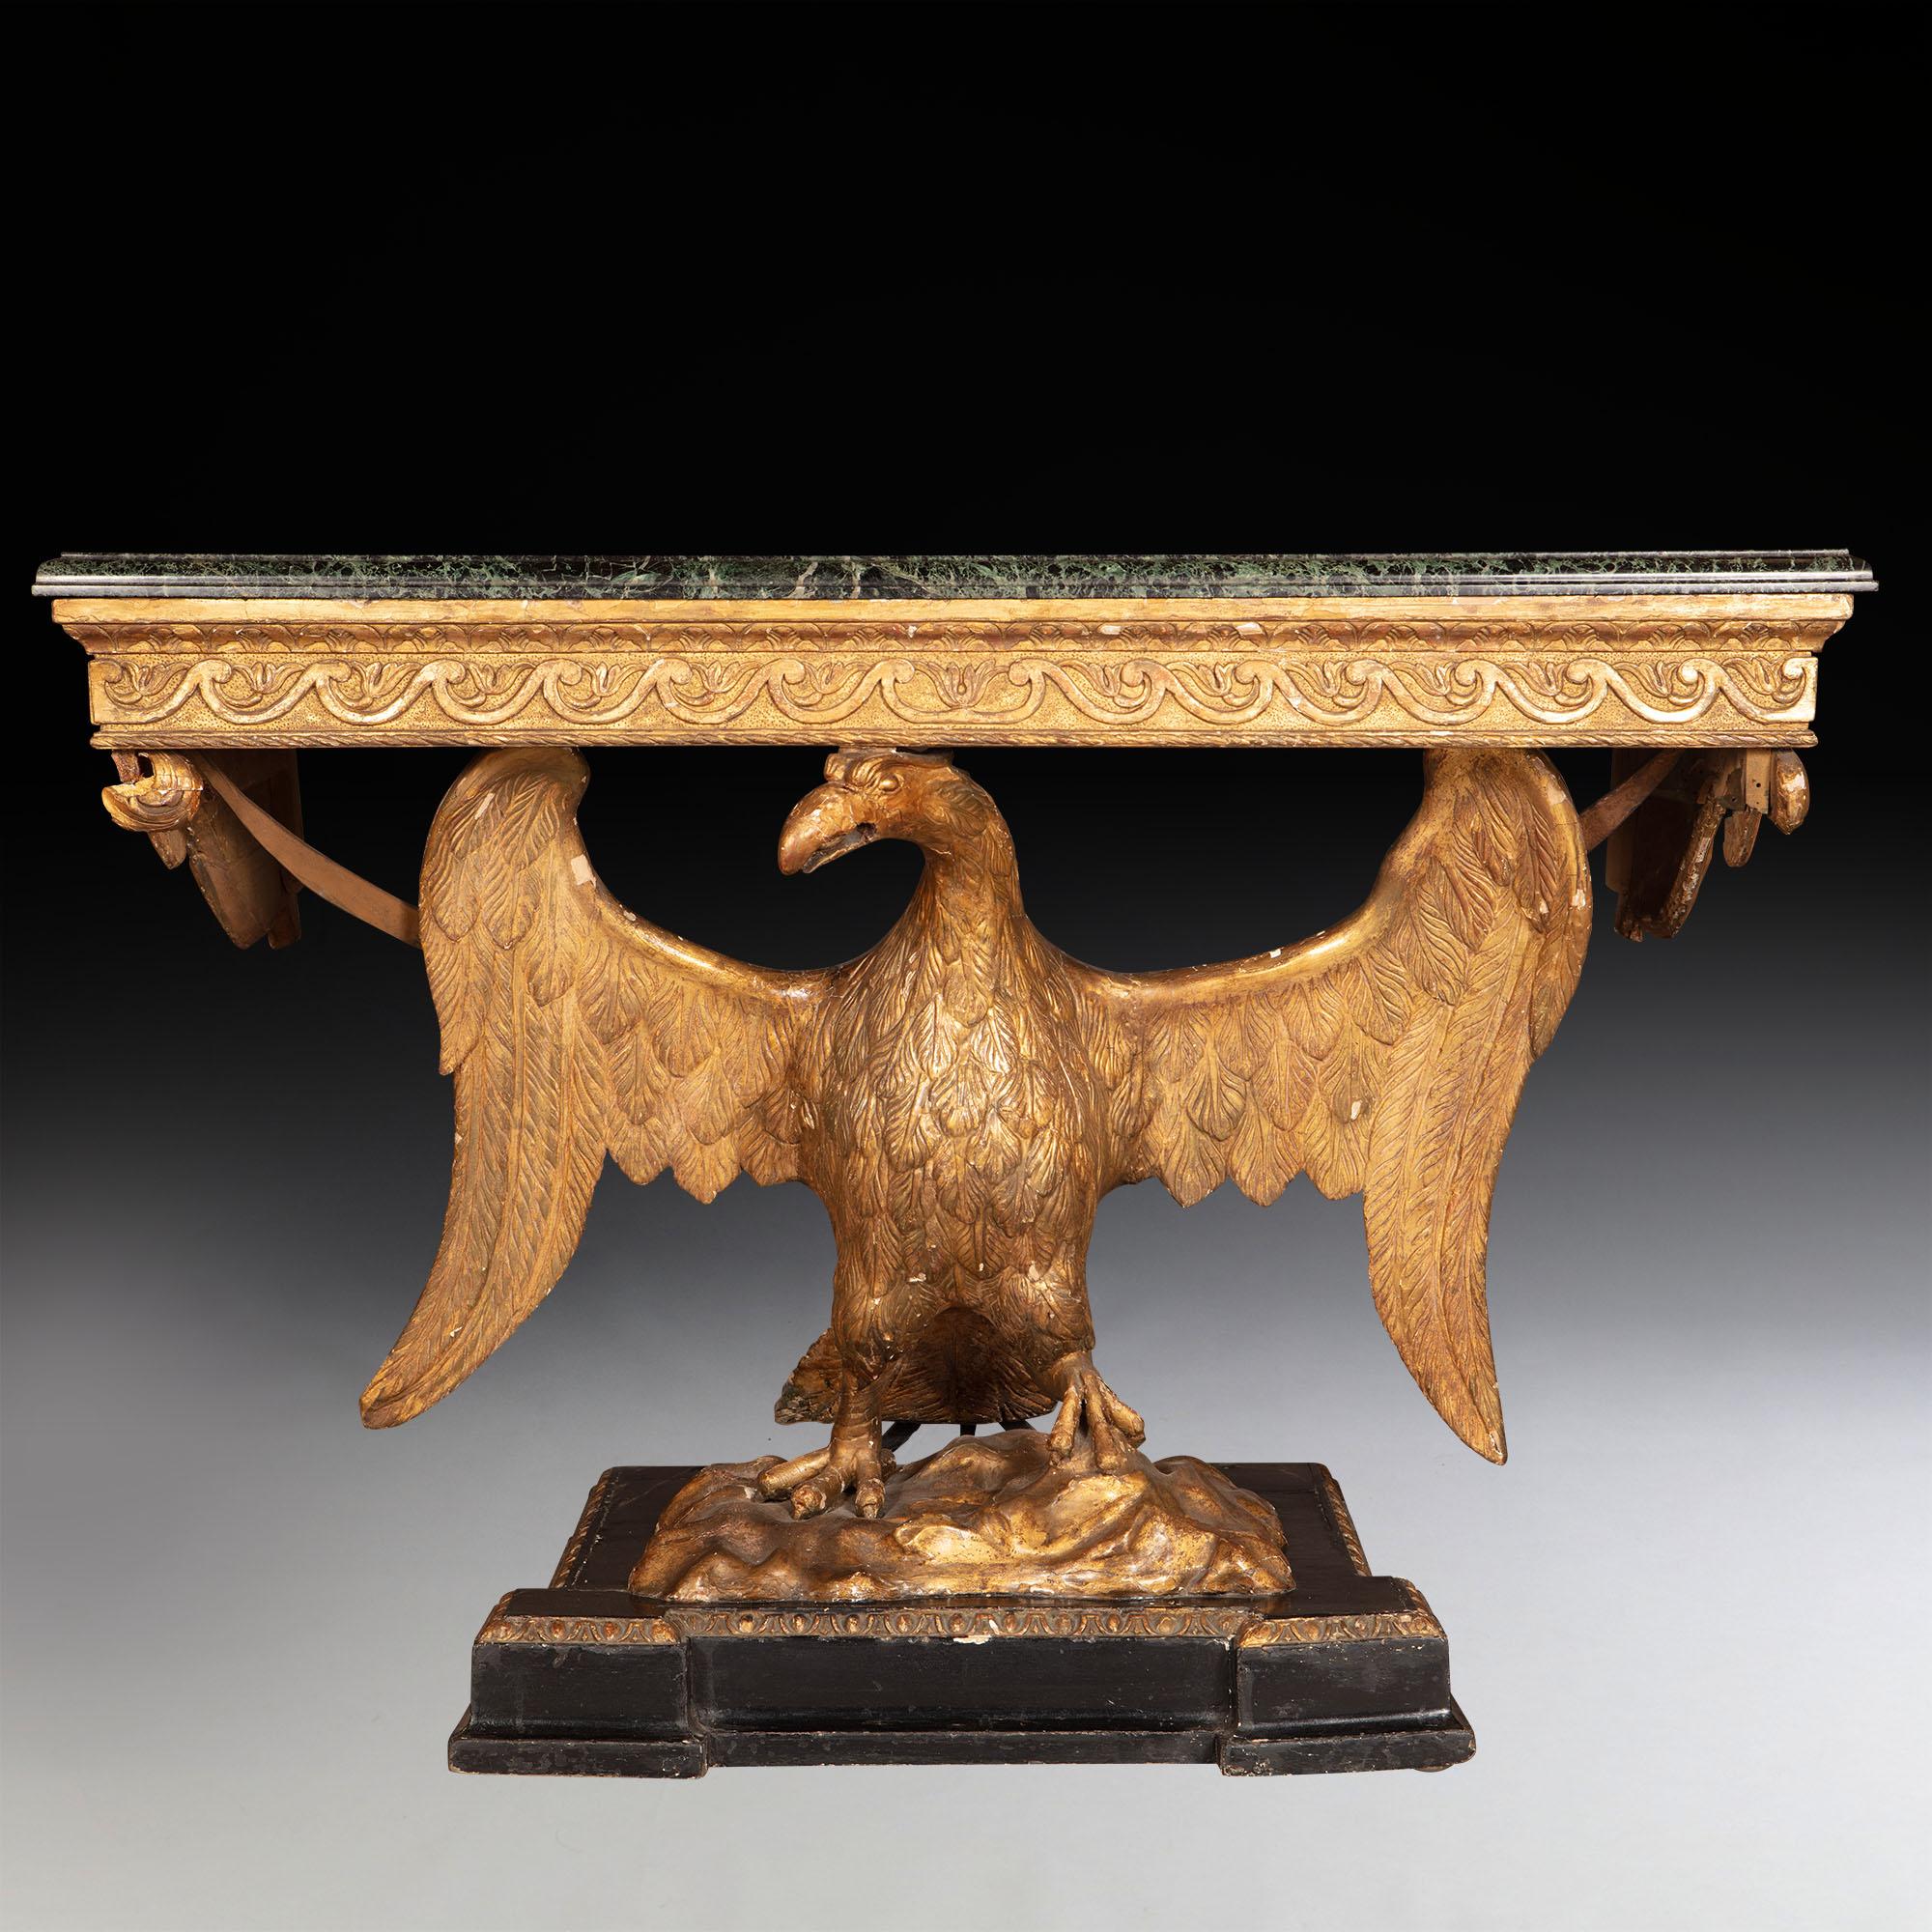 A fine pair of George II style giltwood eagle consoles
The original verde antico rectangular marble tops with a moulded edge, above a vitruvian scroll giltwood frieze supported by carved giltwood winged eagles, standing on rock work ground, above